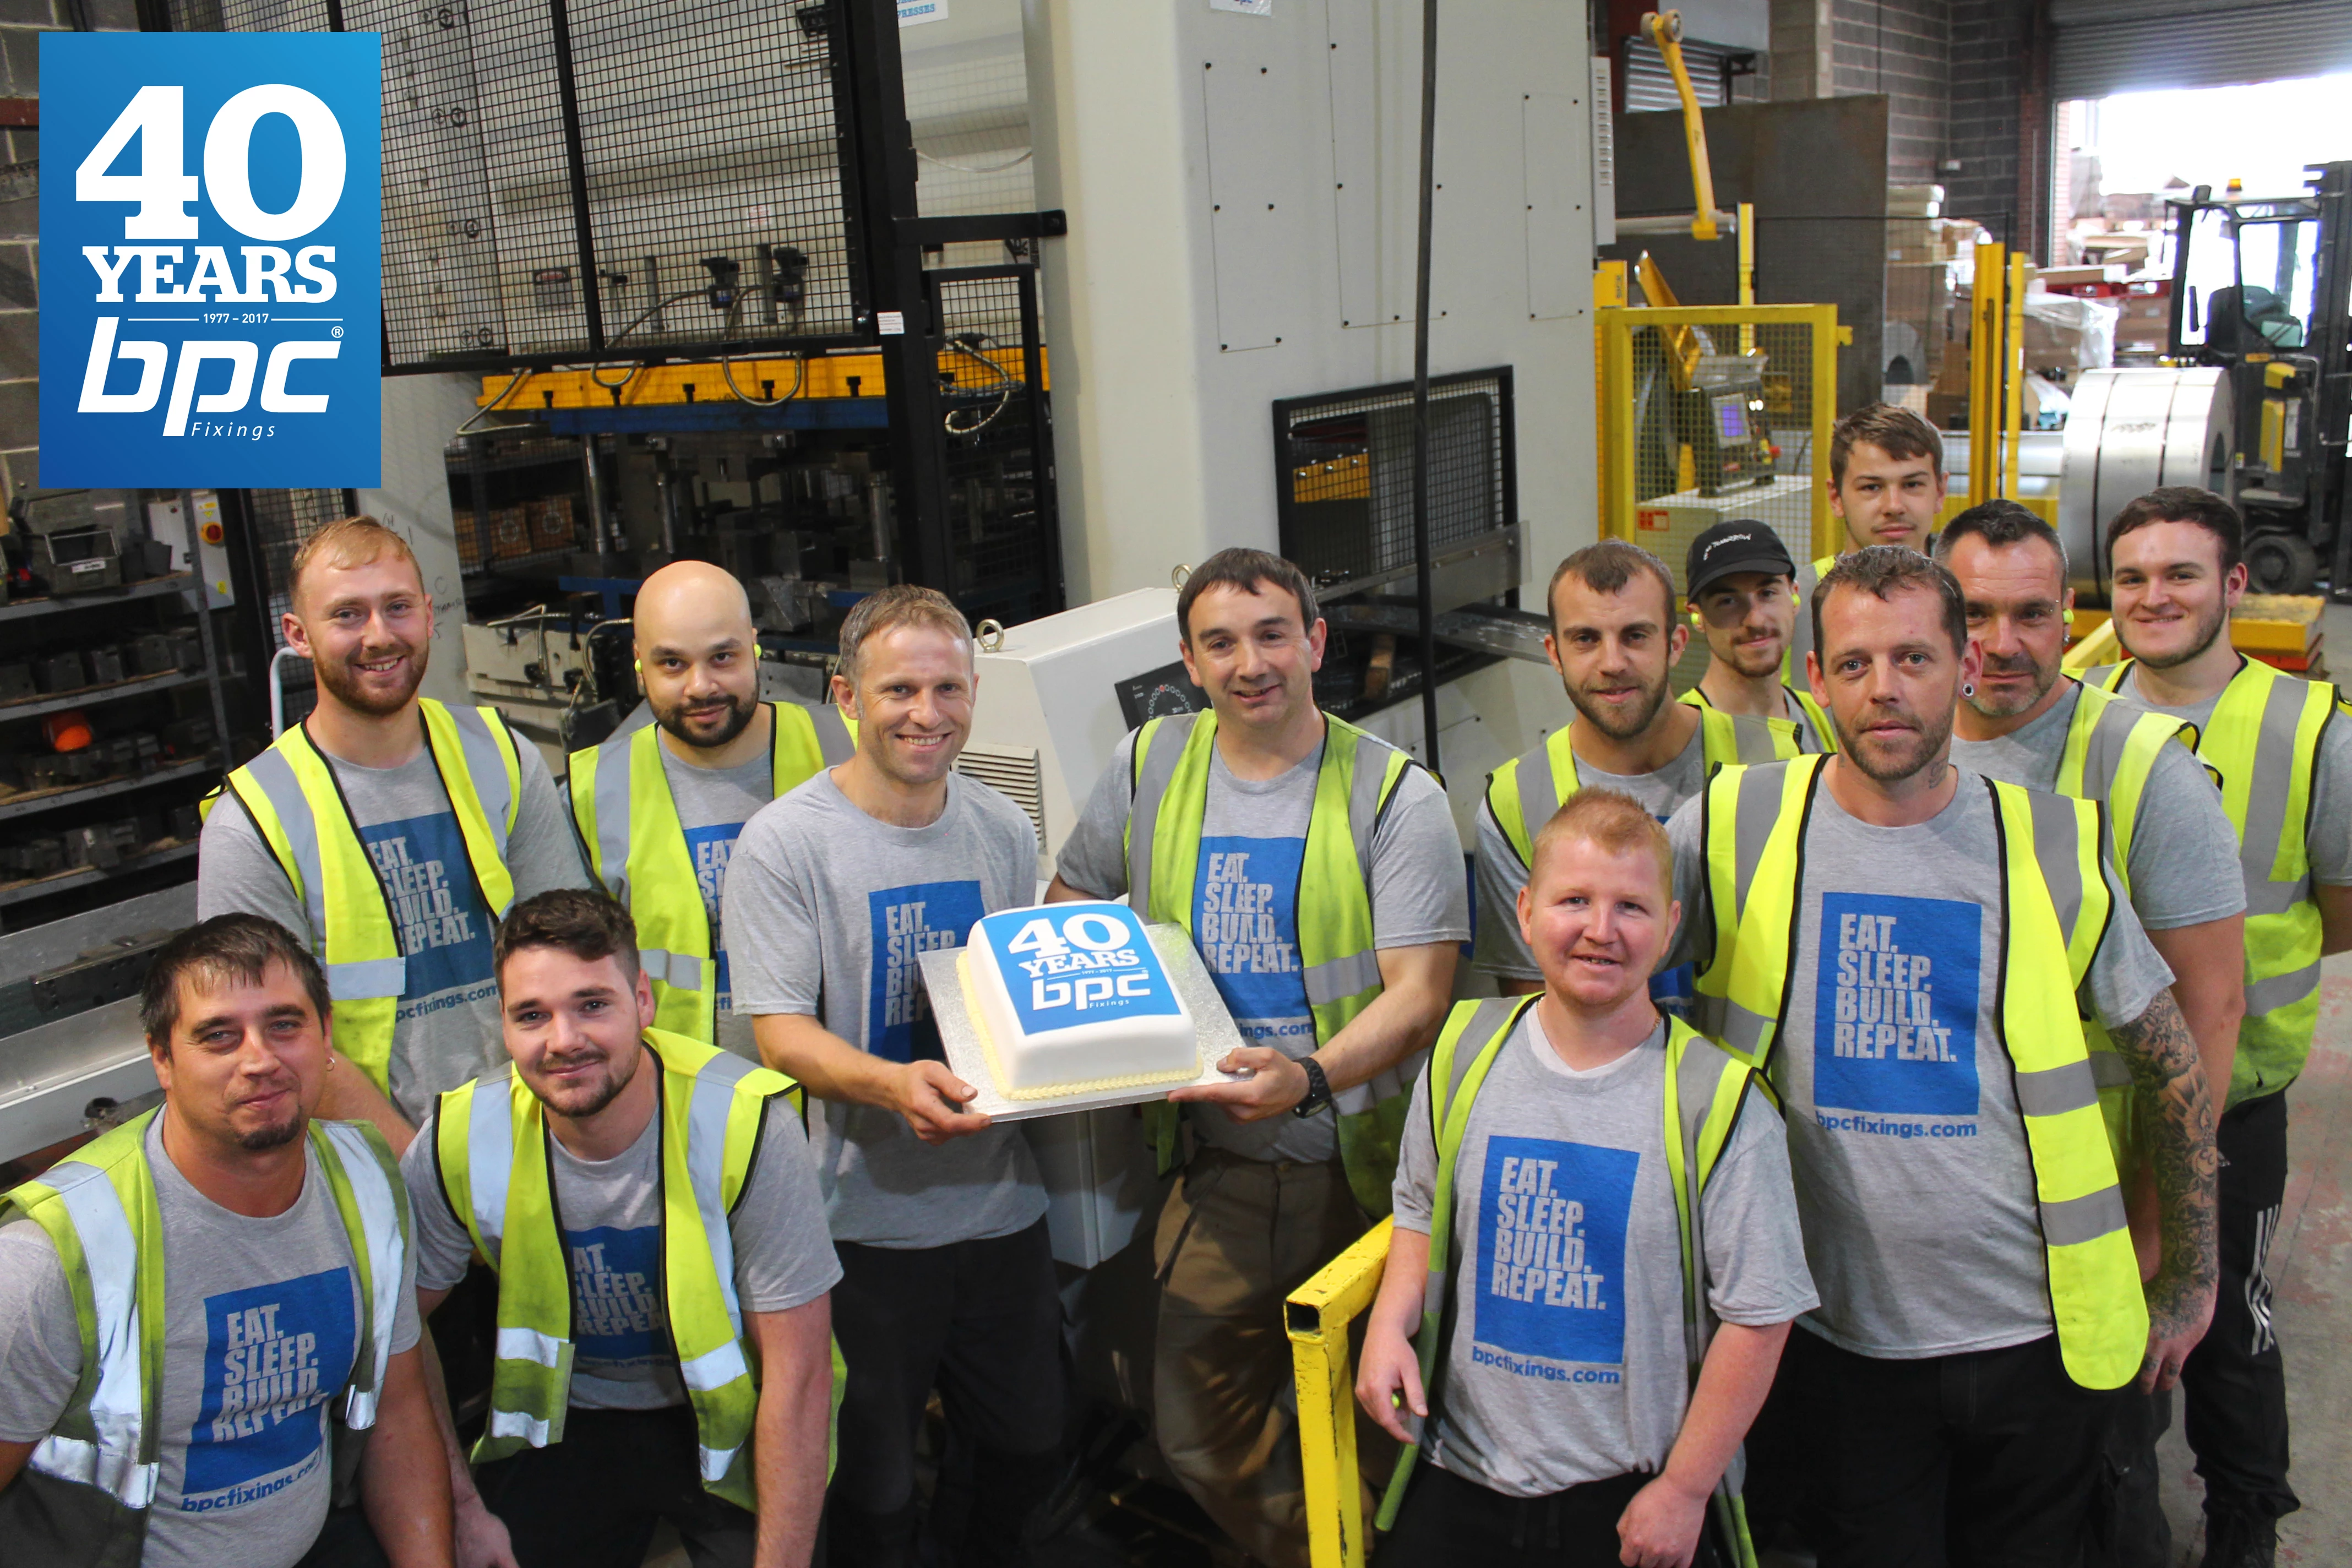 The team at BPC Building Products celebrate 40 years in business